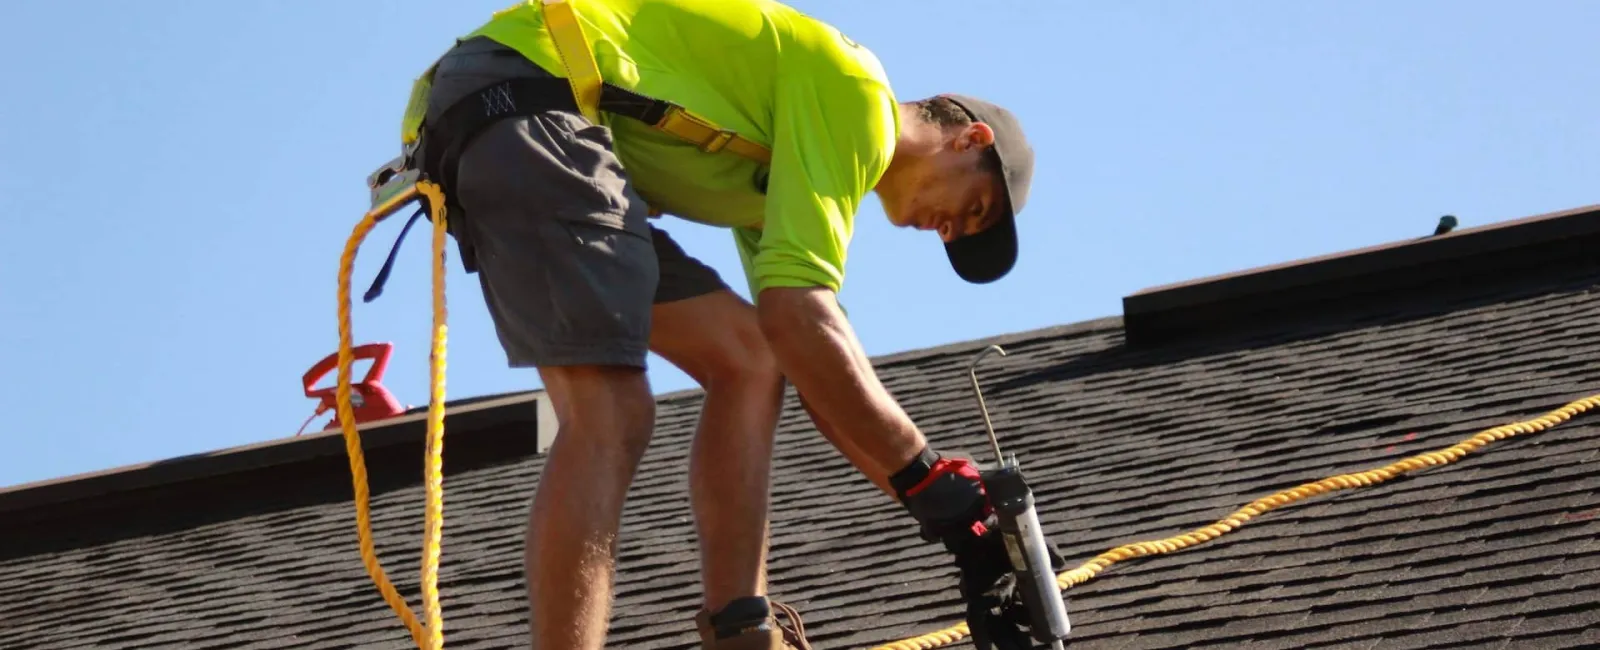 5 Questions to Ask Residential Roofers before Hiring Them